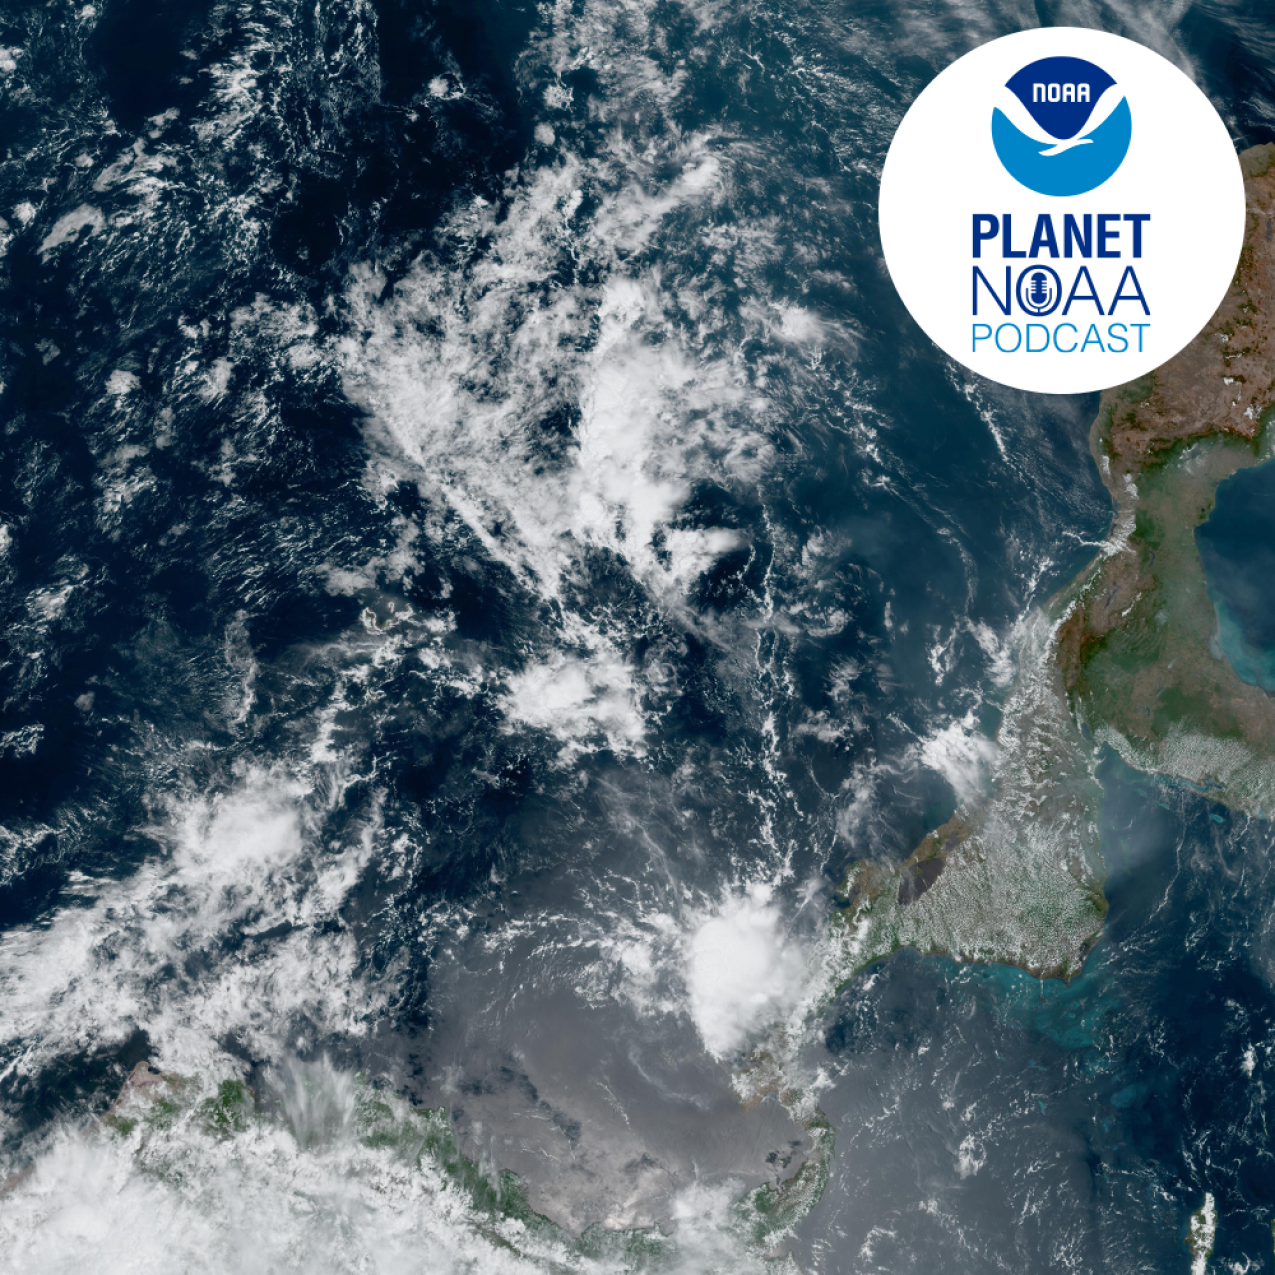 satellite image with Planet NOAA Podcast logo